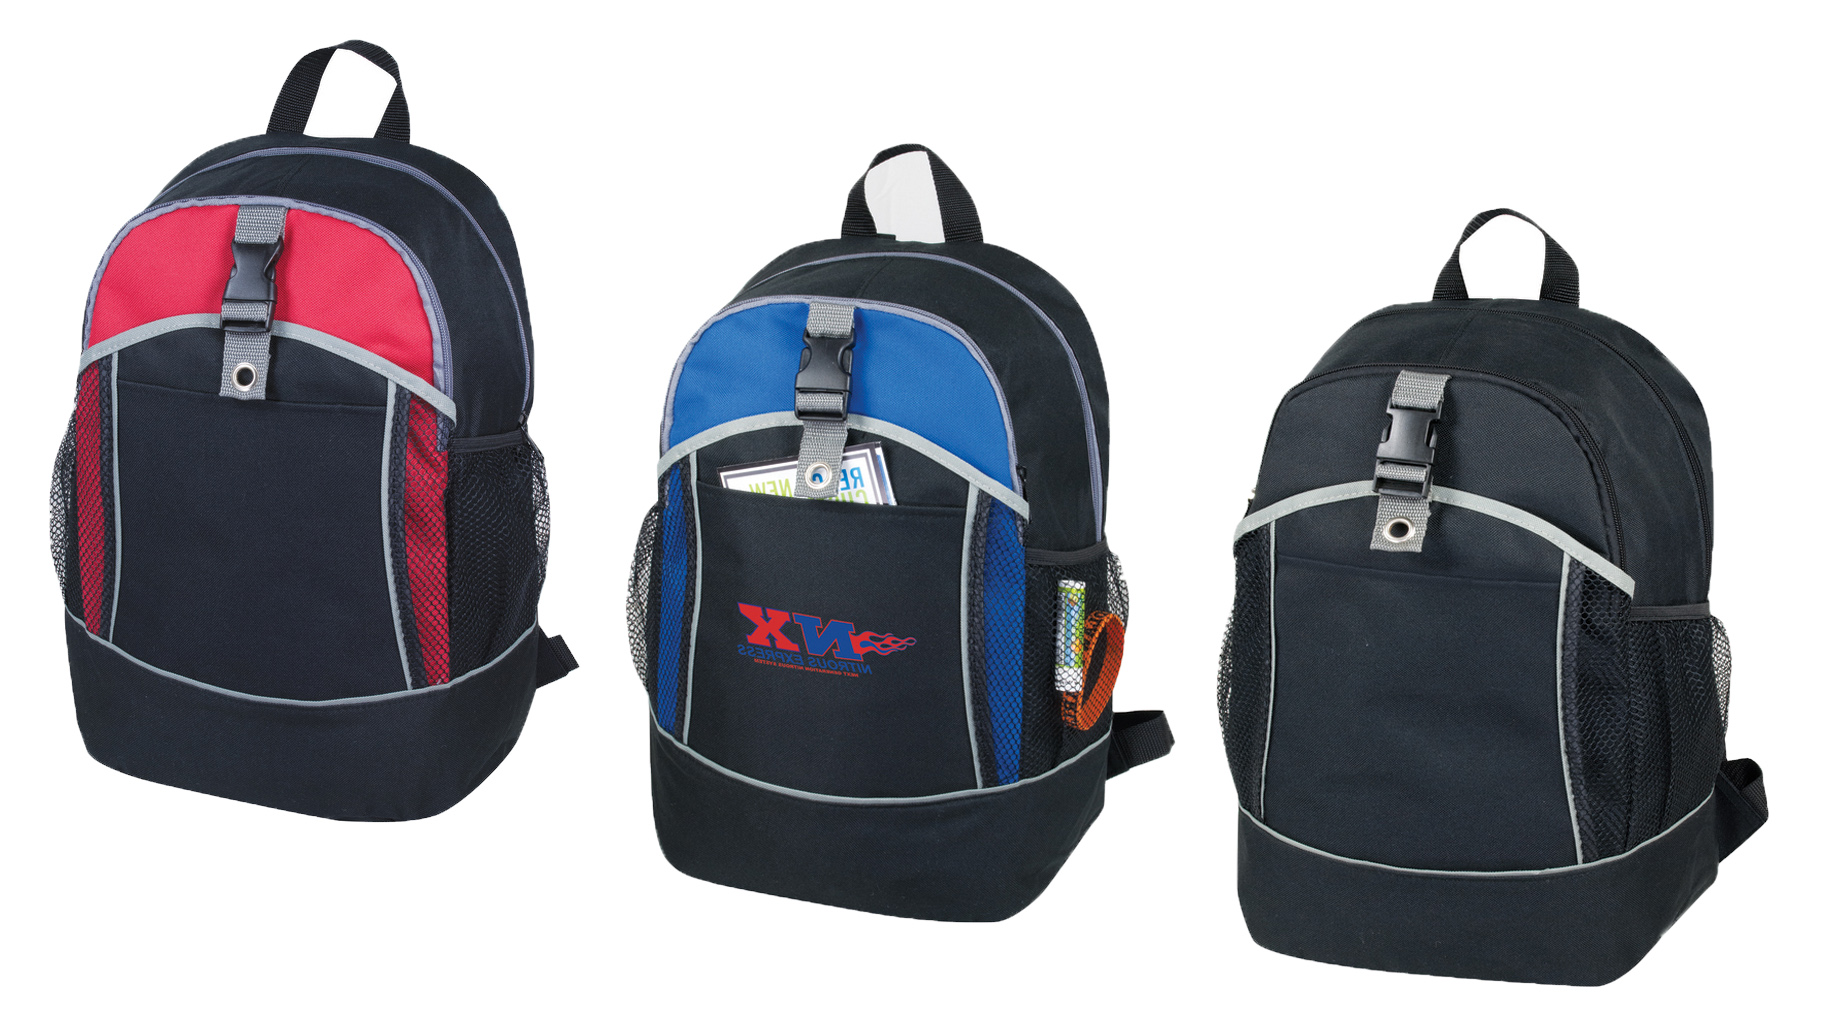 ''17'''' Premium Poly Travel BACKPACKs w/ Mesh Side Pockets - Choose Your Color(s)''